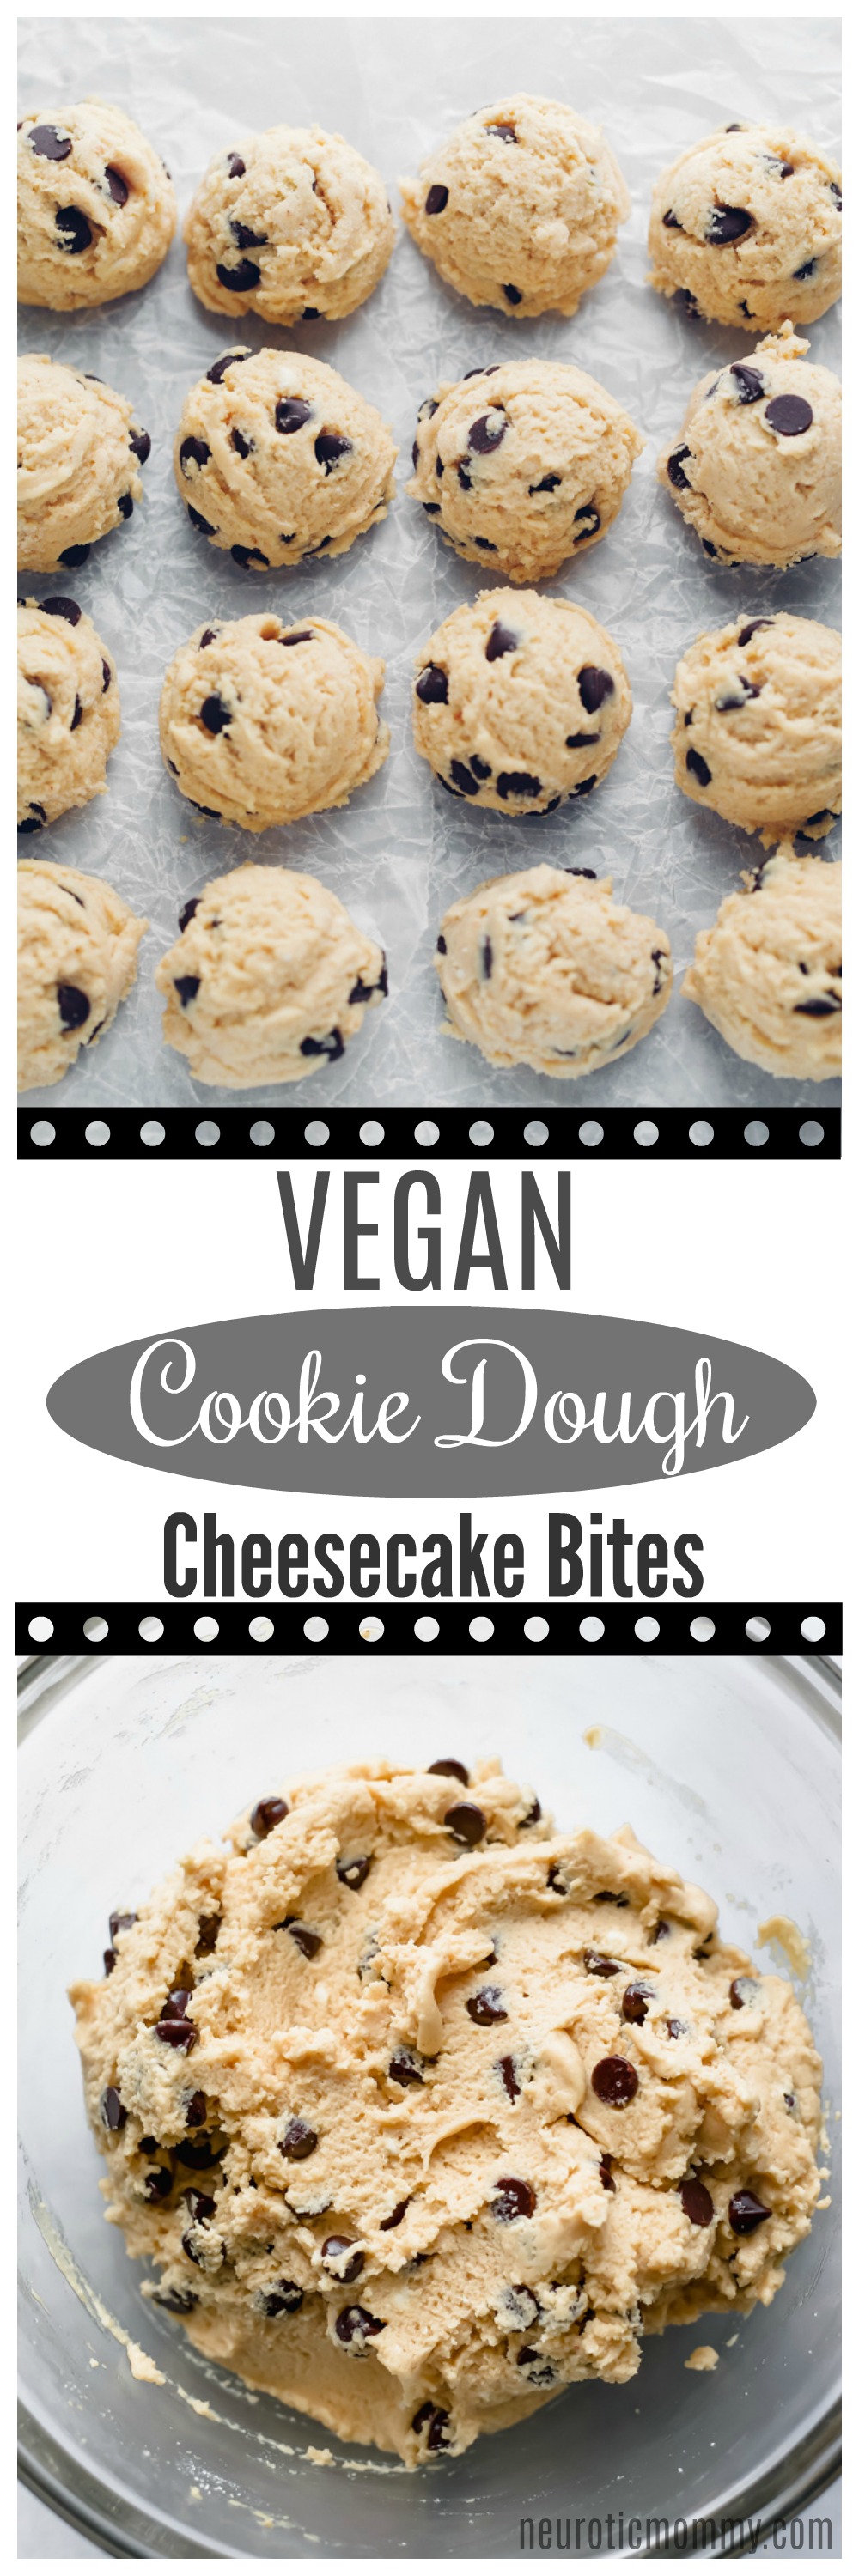 Vegan Cookie Dough Cheesecake Bites - If your a cookie dough and cheesecake lover then these are the bites for you! Made with sugar free dark chocolate chips, sweetened with monk fruit, making this low carb snack a must have. NeuroticMommy.com #vegan #fatbomb #keto #snacks